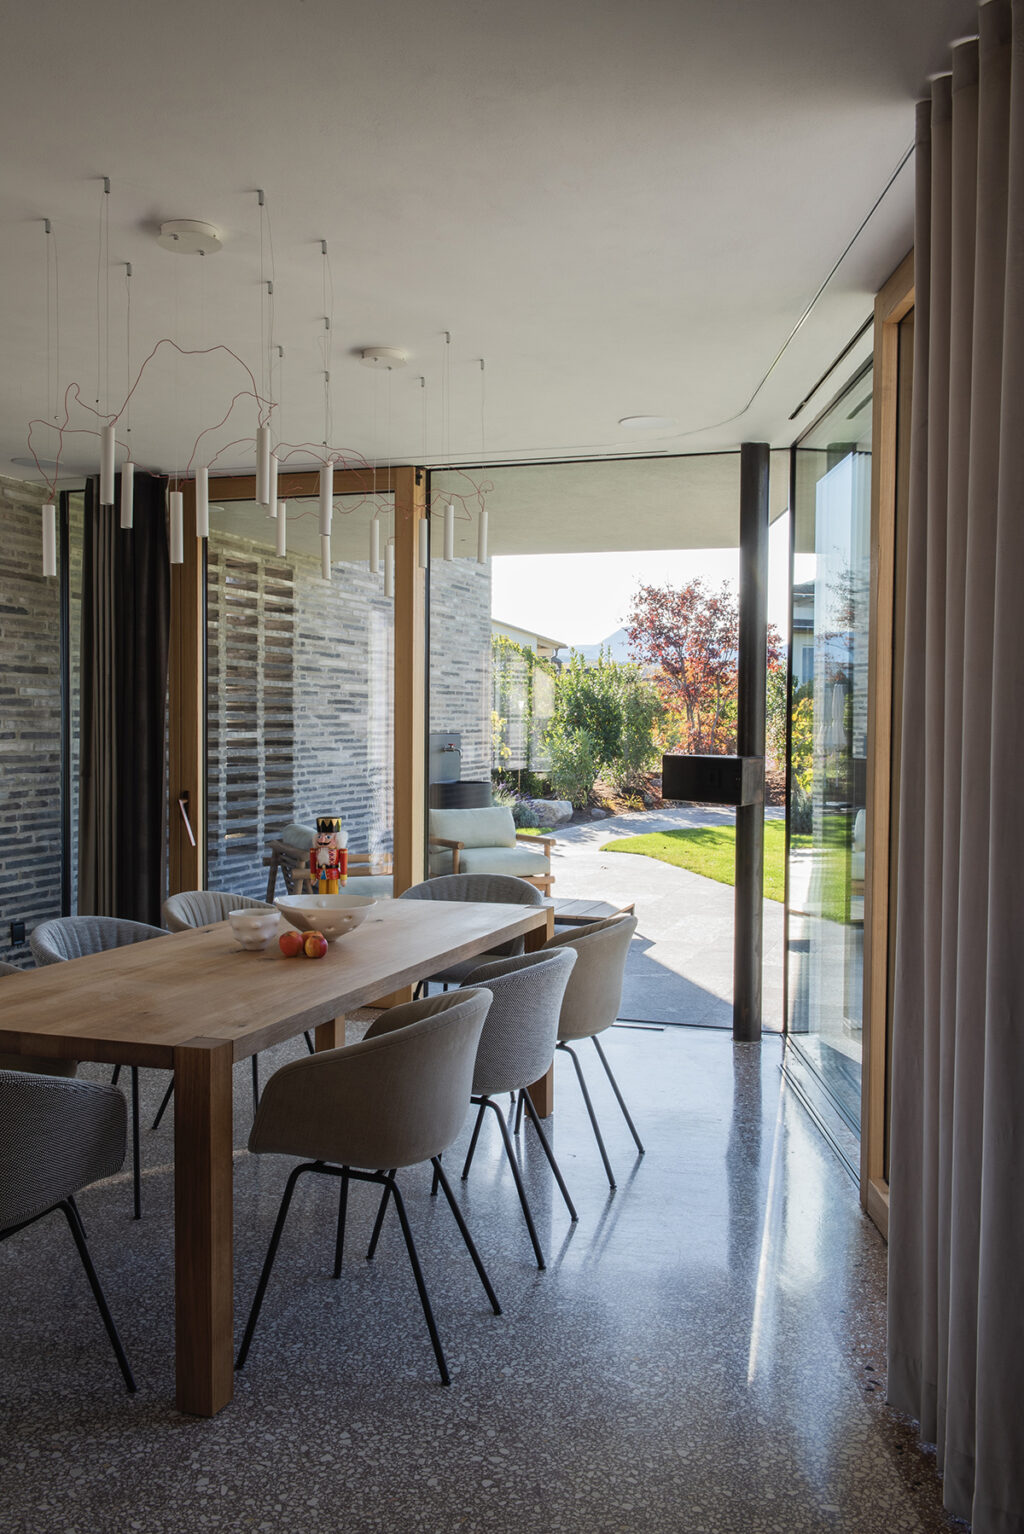 Dining area with patio for breakfast ©Paolo Abate